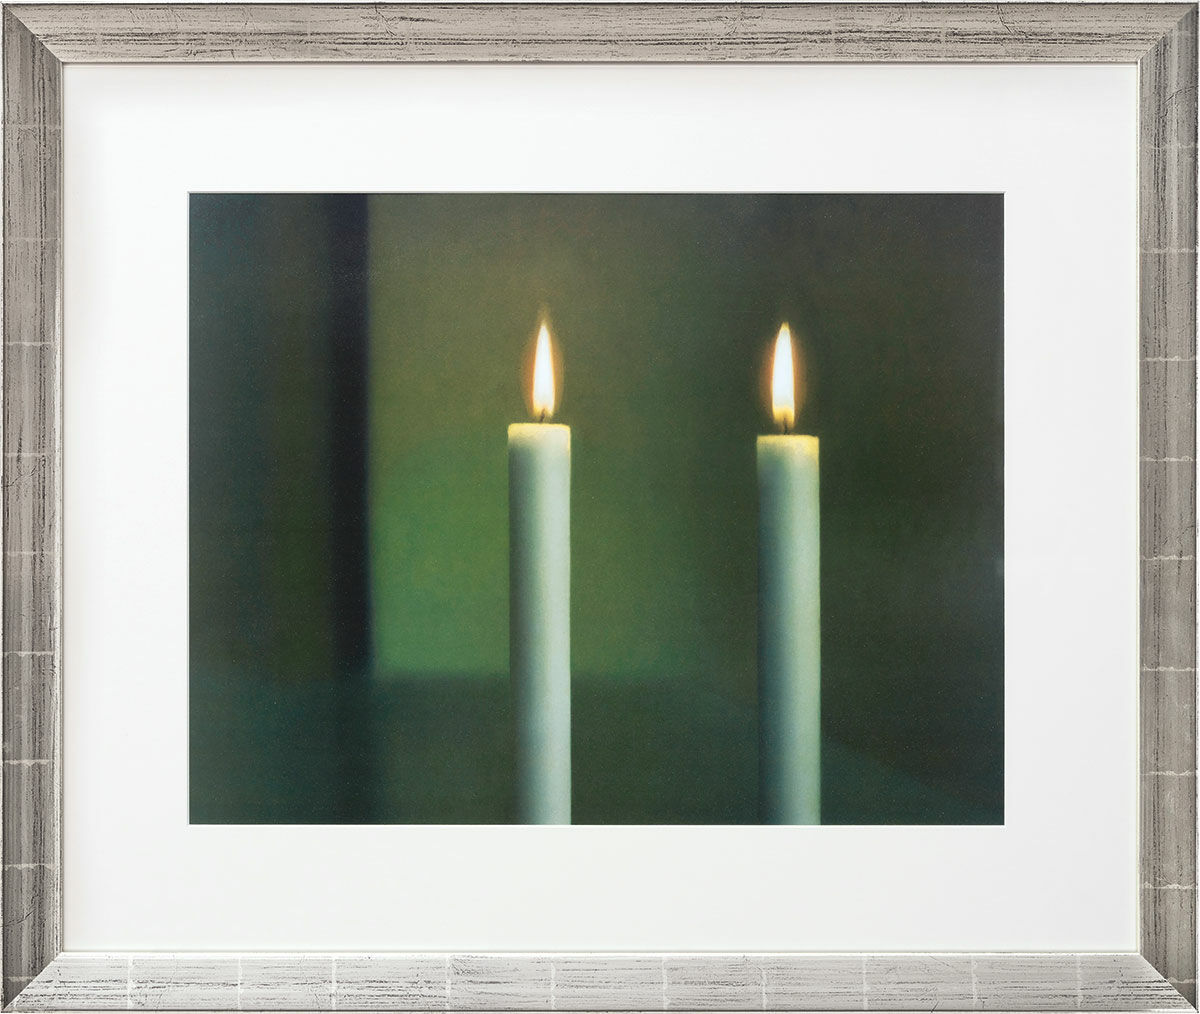 Picture "Two Candles" (1982), silver-coloured framed version by Gerhard Richter